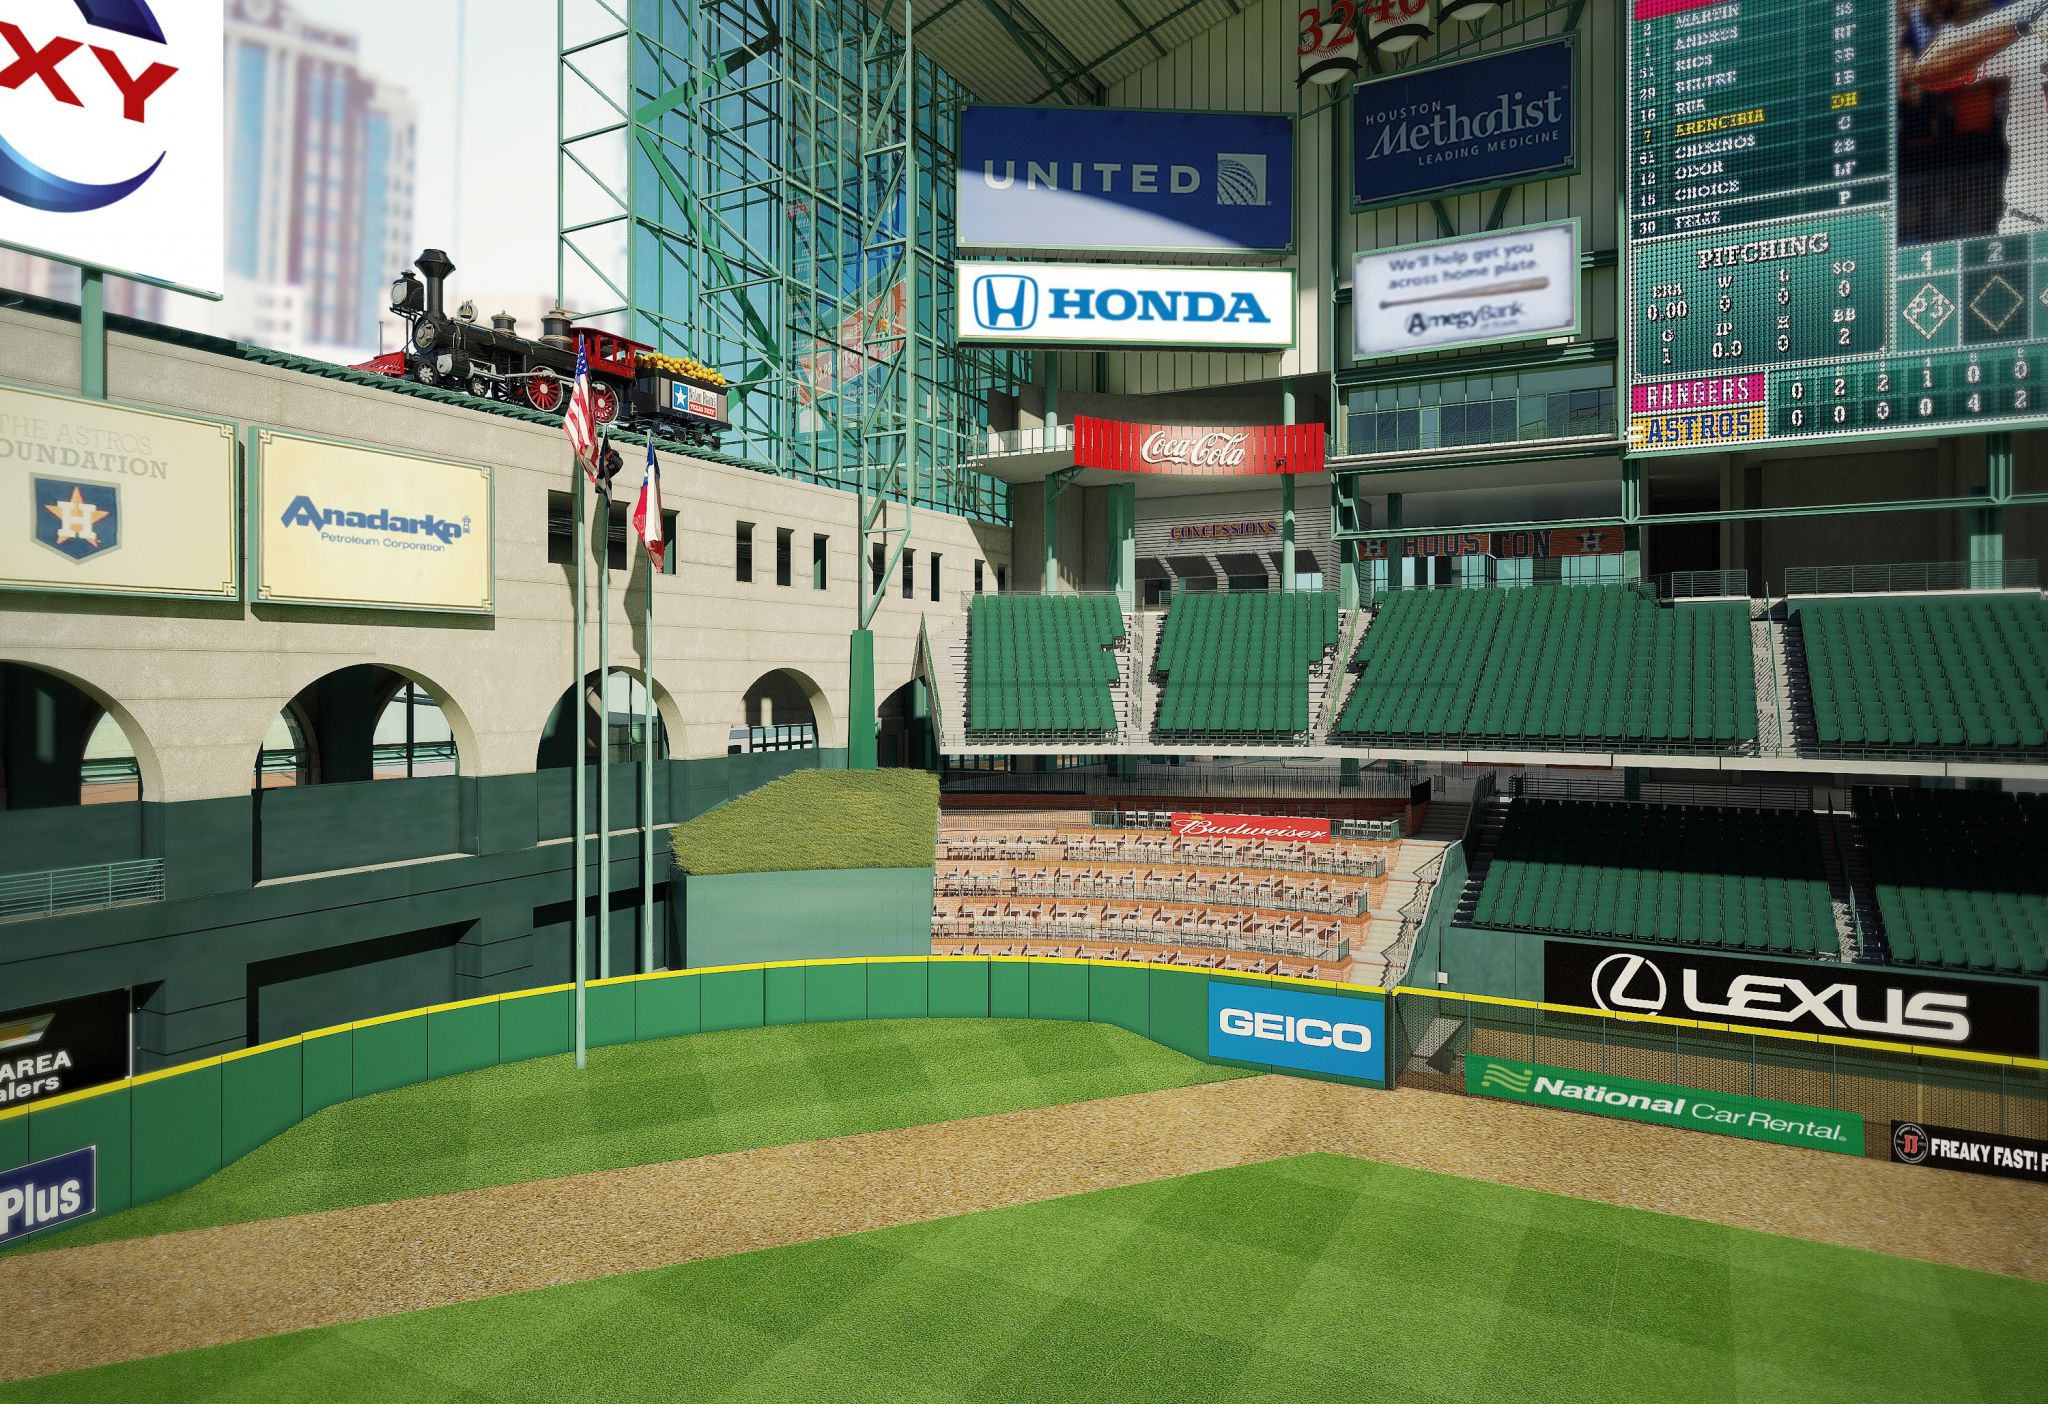 Astros getting new video scoreboard at Minute Maid Park